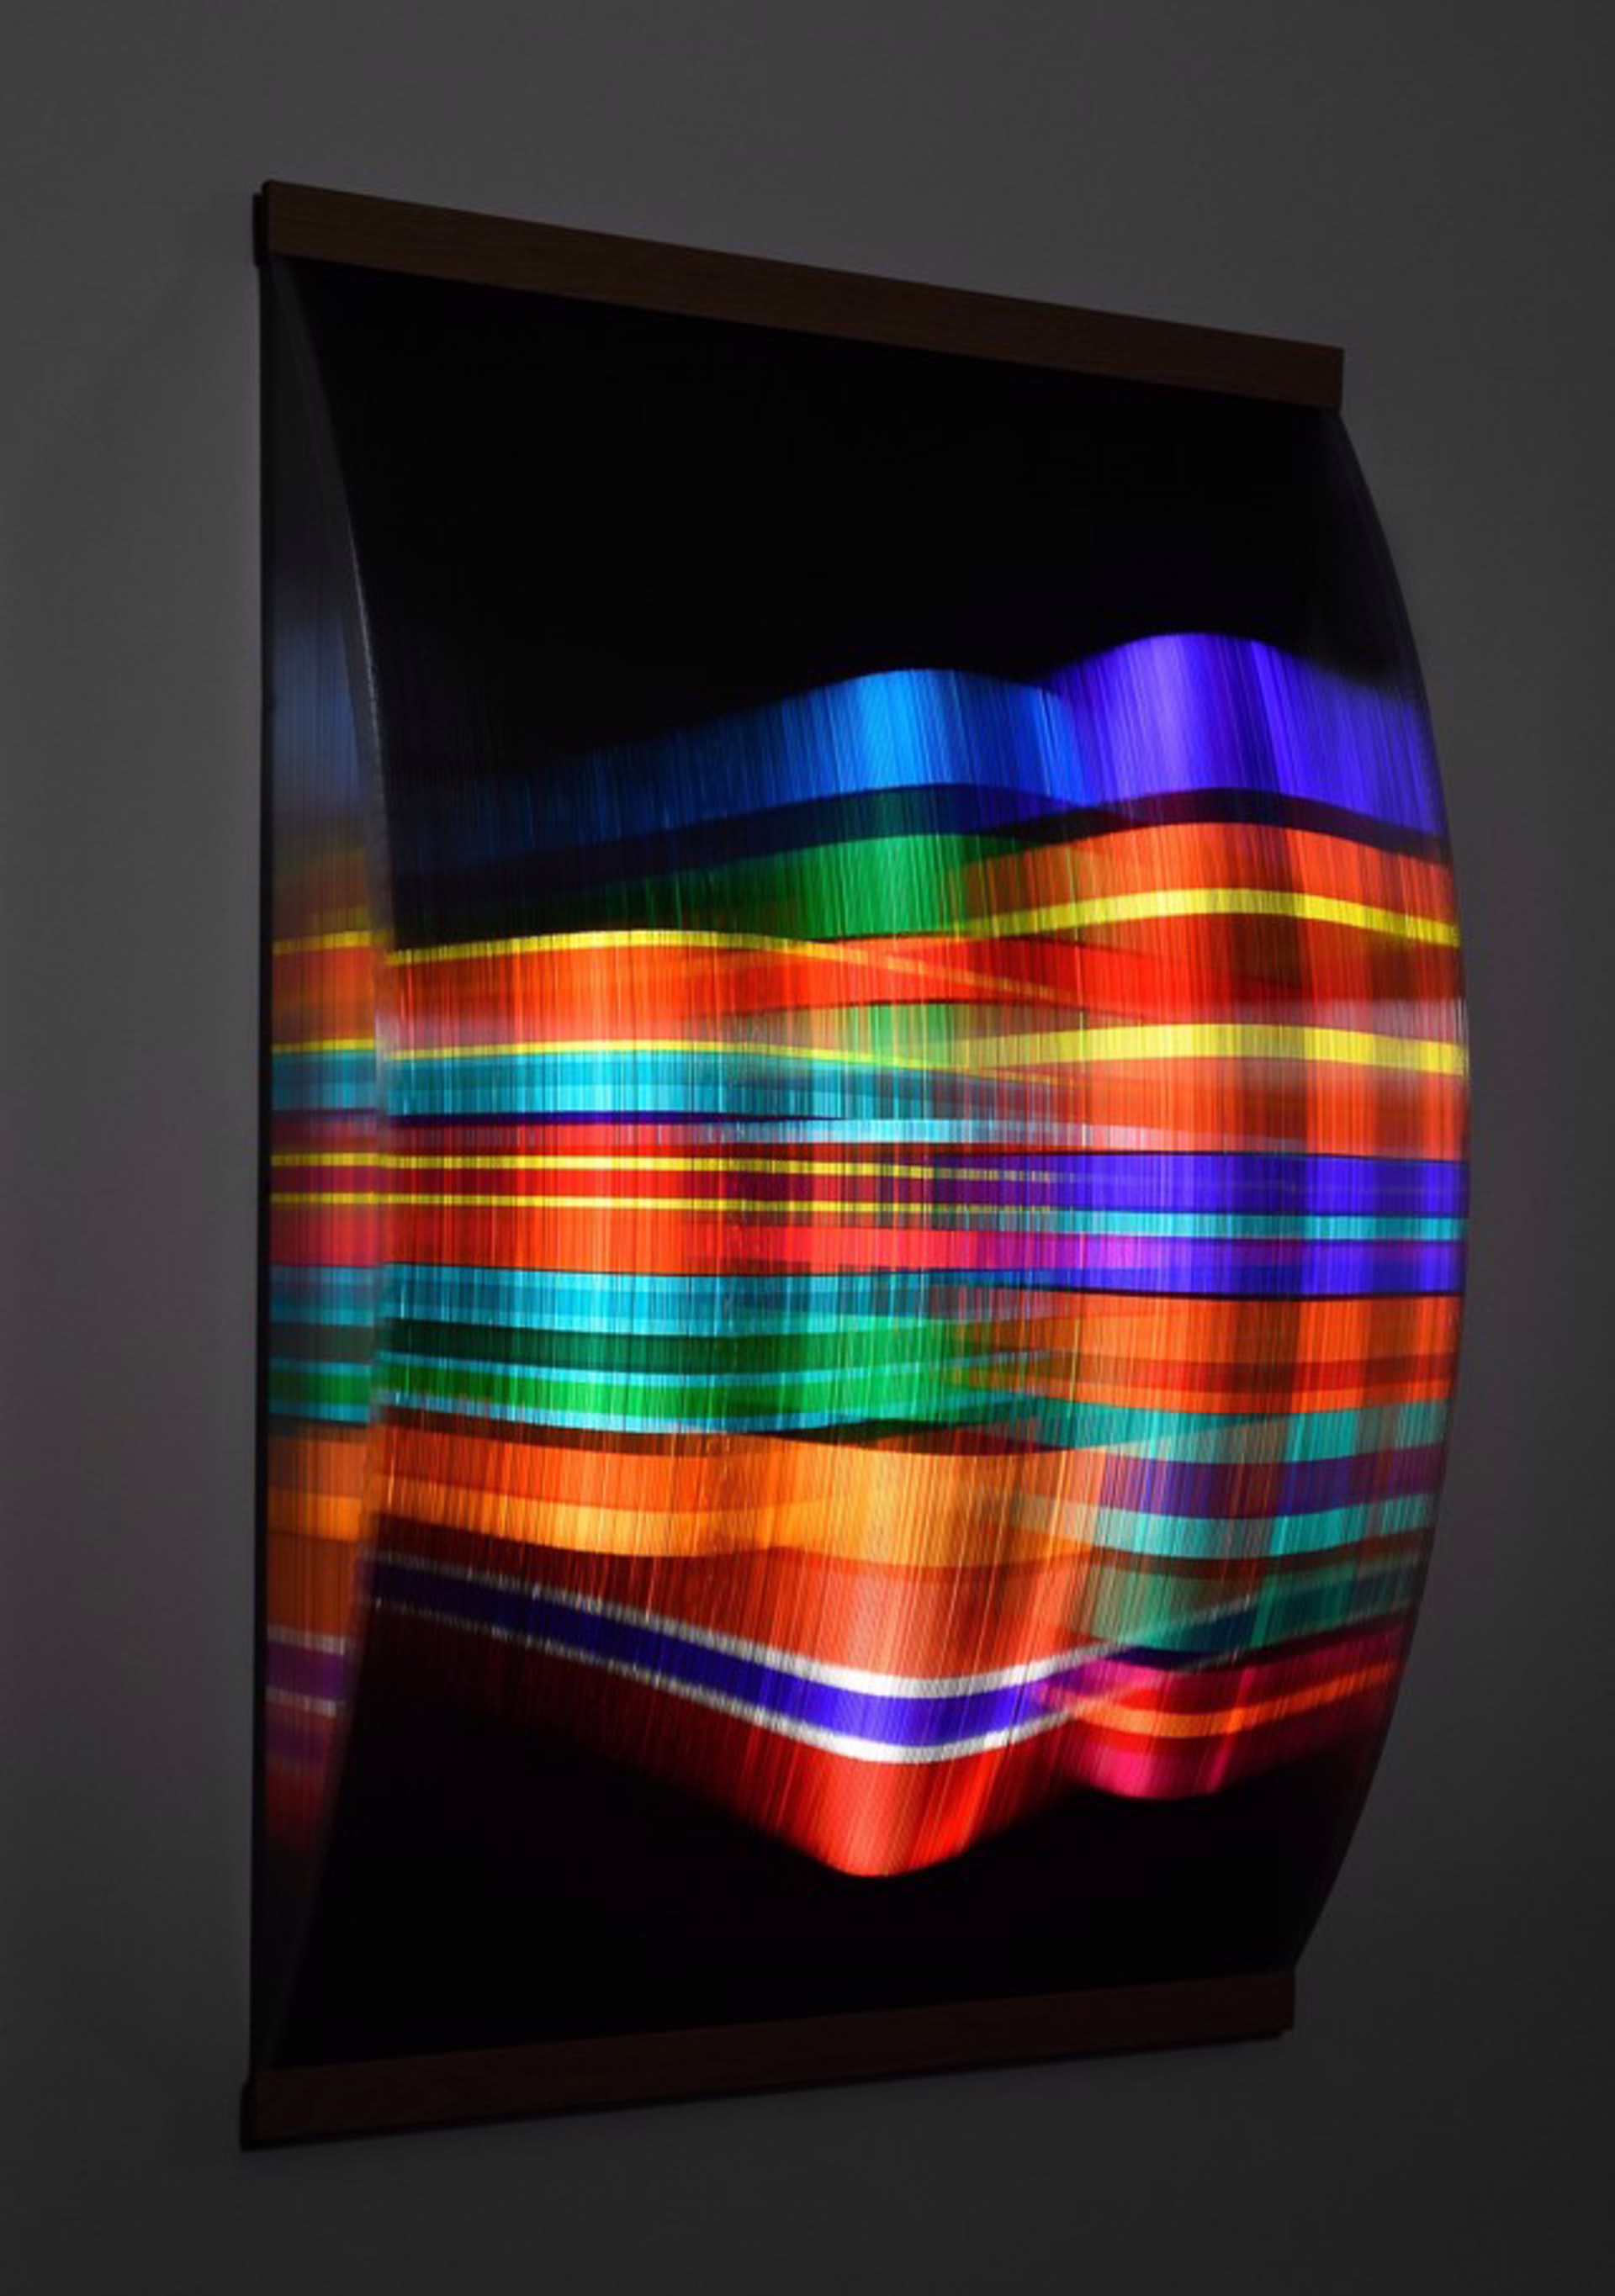 Diffraction Panel #3 by Martin Cail